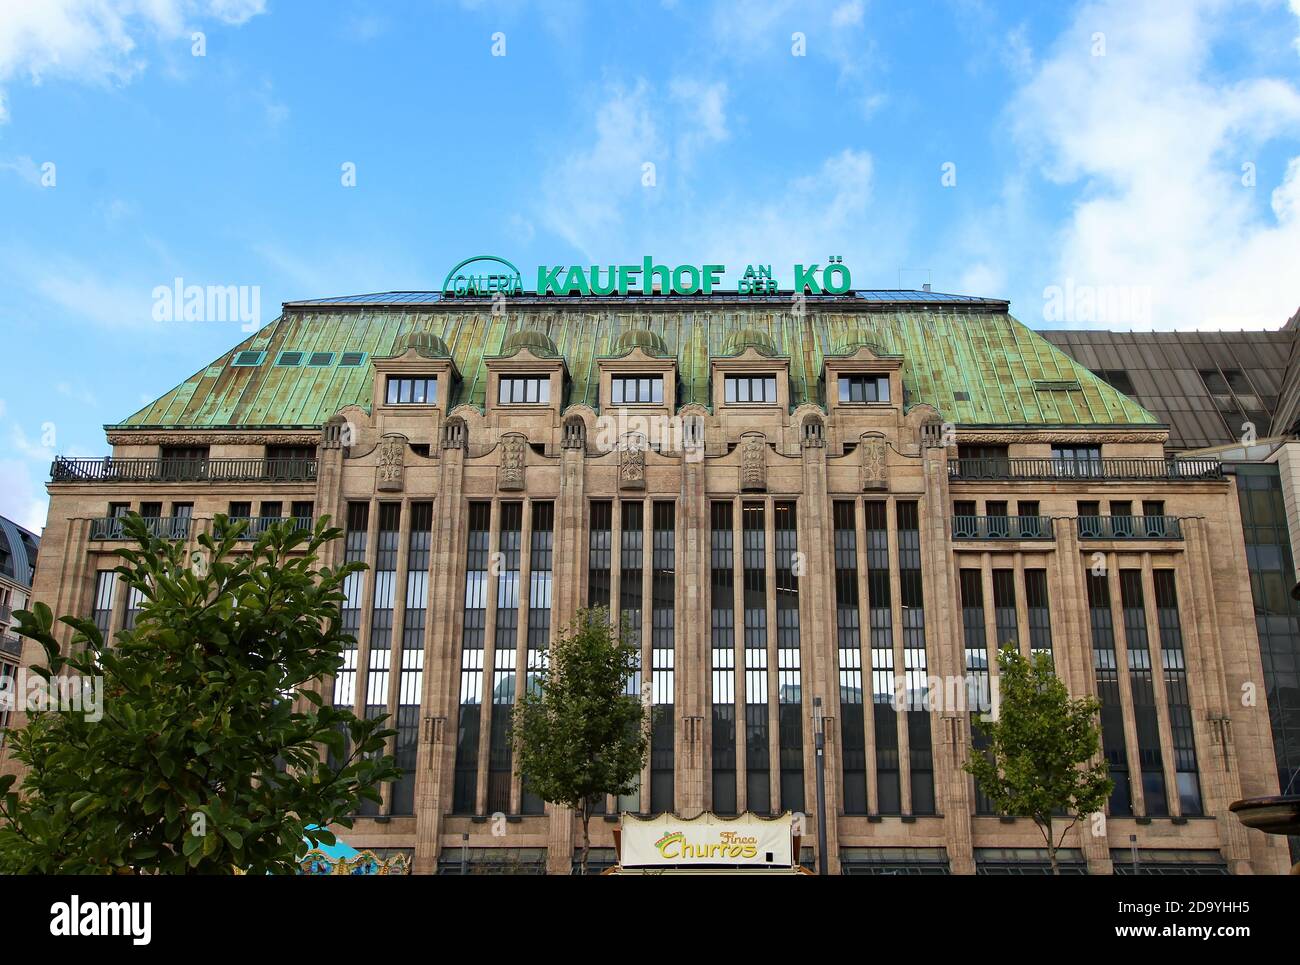 Beautiful historic building of the well-known department store 'Kaufhof an der Kö' (Galeria Kaufhof), built 1907 - 1909. Stock Photo